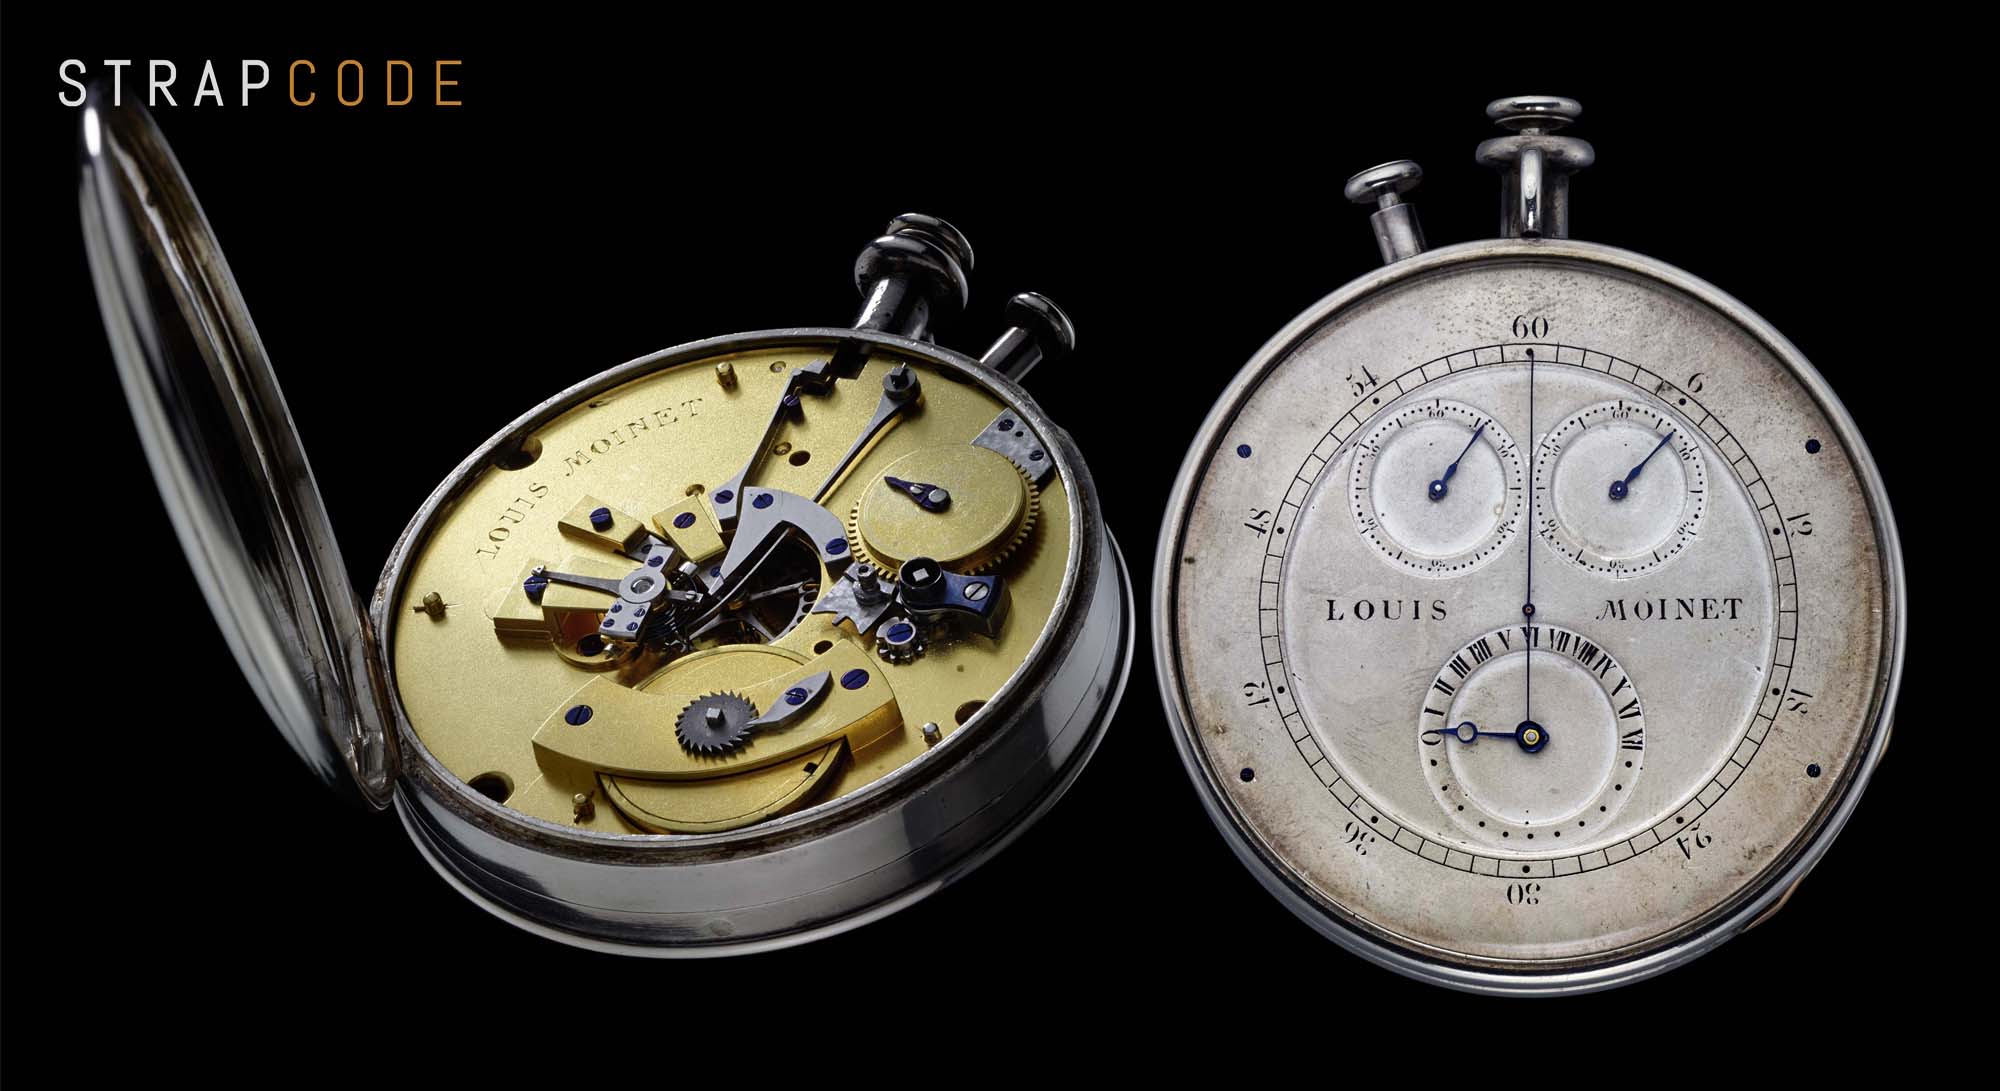 French watchmaker Louis Moinet first Chronograph at 1816